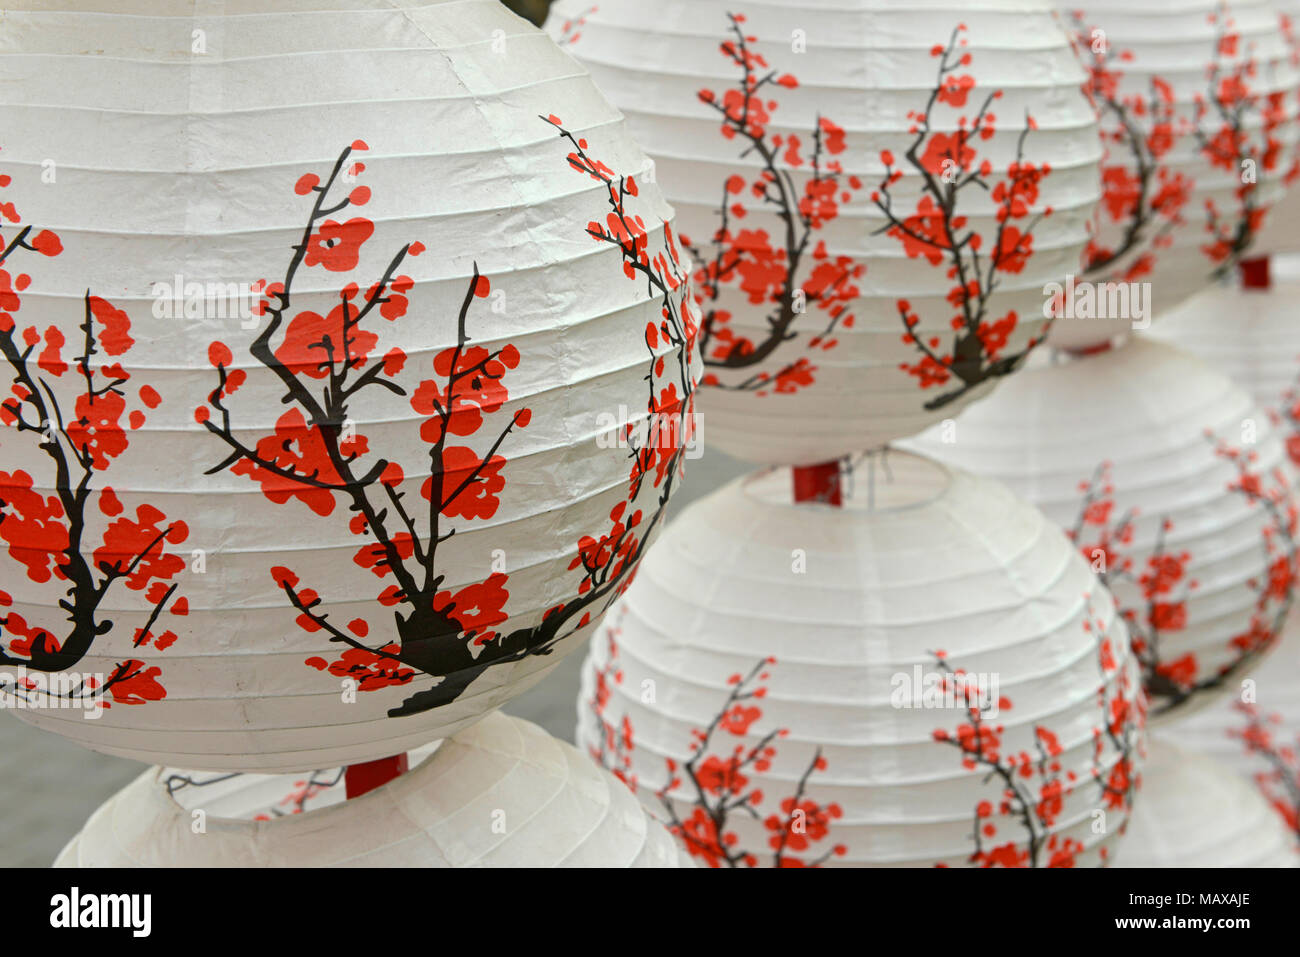 Painted paper lanterns hang in the Ming Dynasty Wall Relics Park in central  eastern Beijing, China, during a cherry flower festival Stock Photo - Alamy